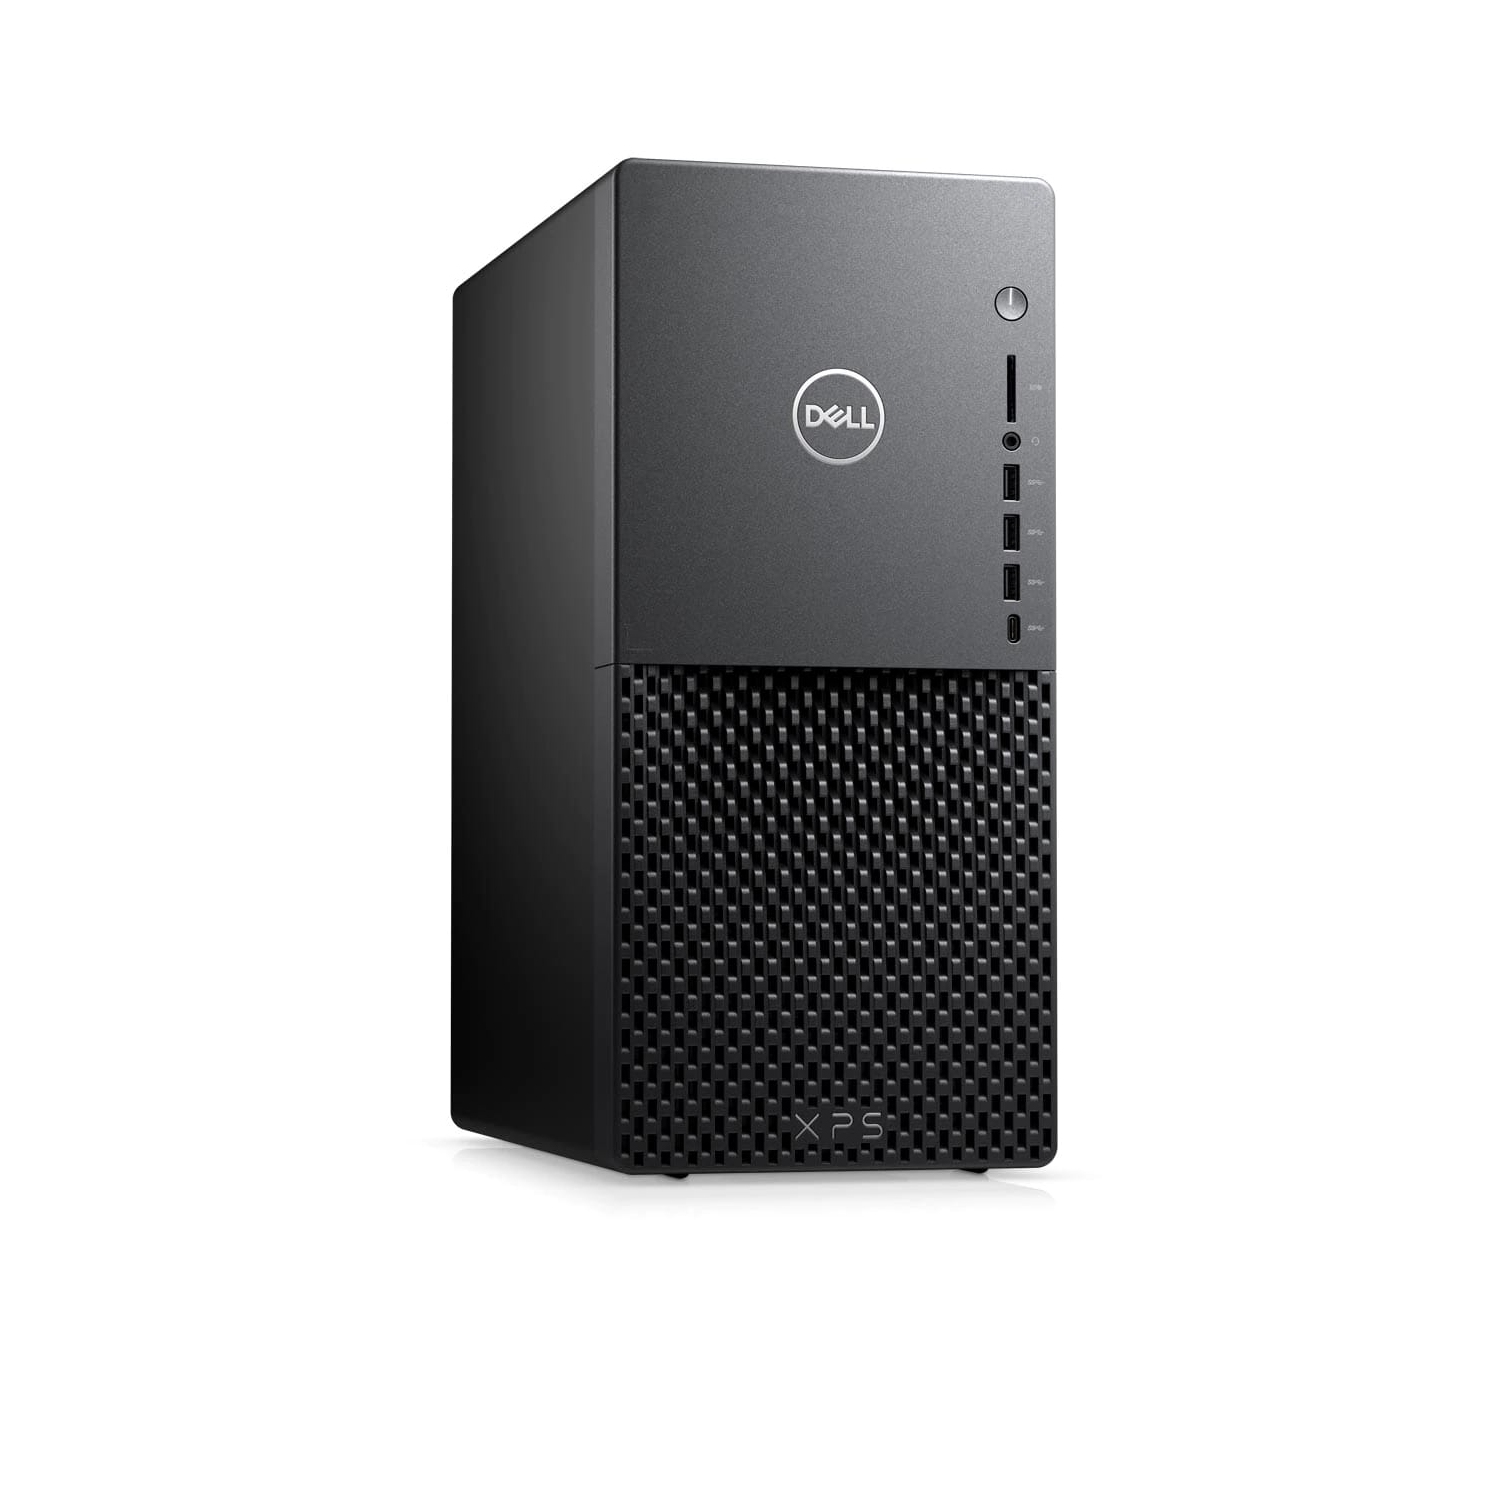 Refurbished (Excellent) - Dell XPS 8940 Desktop (2020) | Core i7 - 2TB HDD + 512GB SSD - 32GB RAM - GT 1030 | 8 Cores @ 4.9 GHz - 11th Gen CPU Certified Refurbished